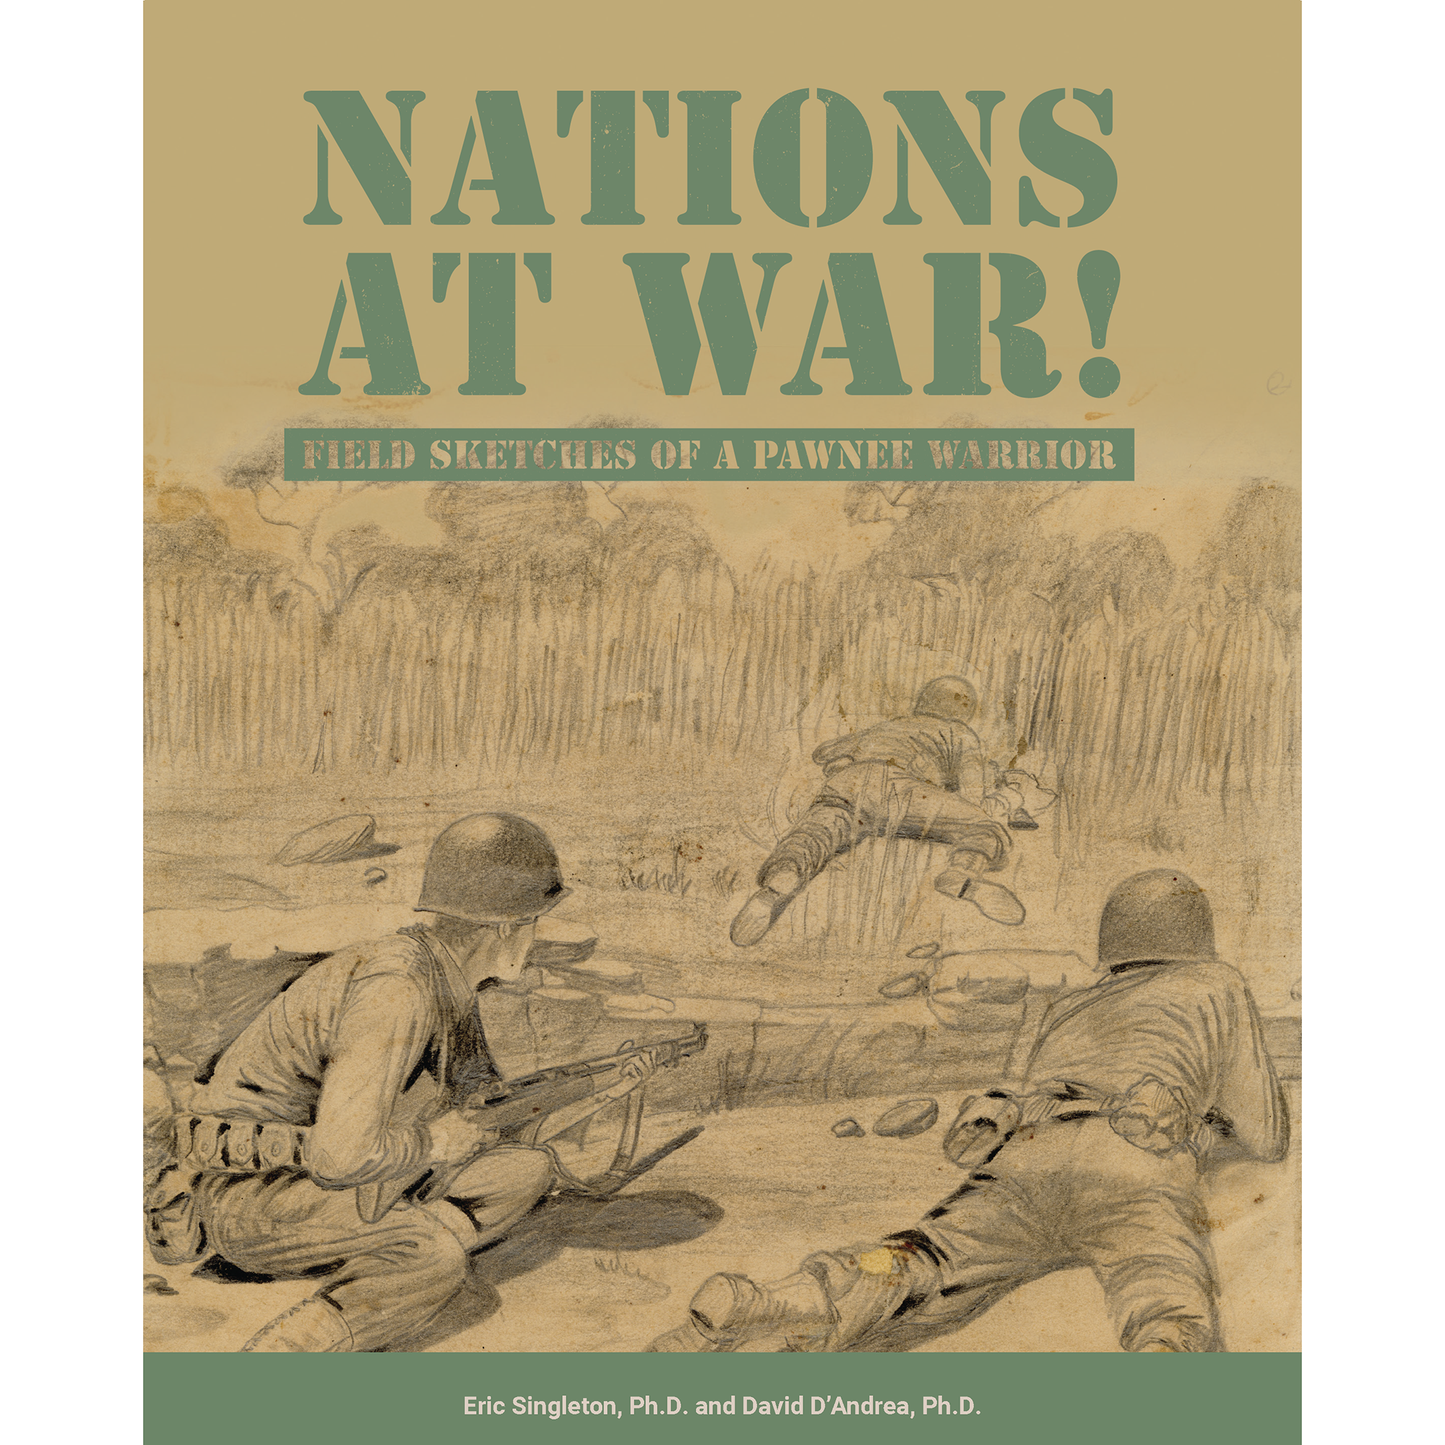 Nations at War!: Field Sketches of a Pawnee Warrior by Eric D. Singleton, Ph.D. and David D'Andrea, Ph.D.